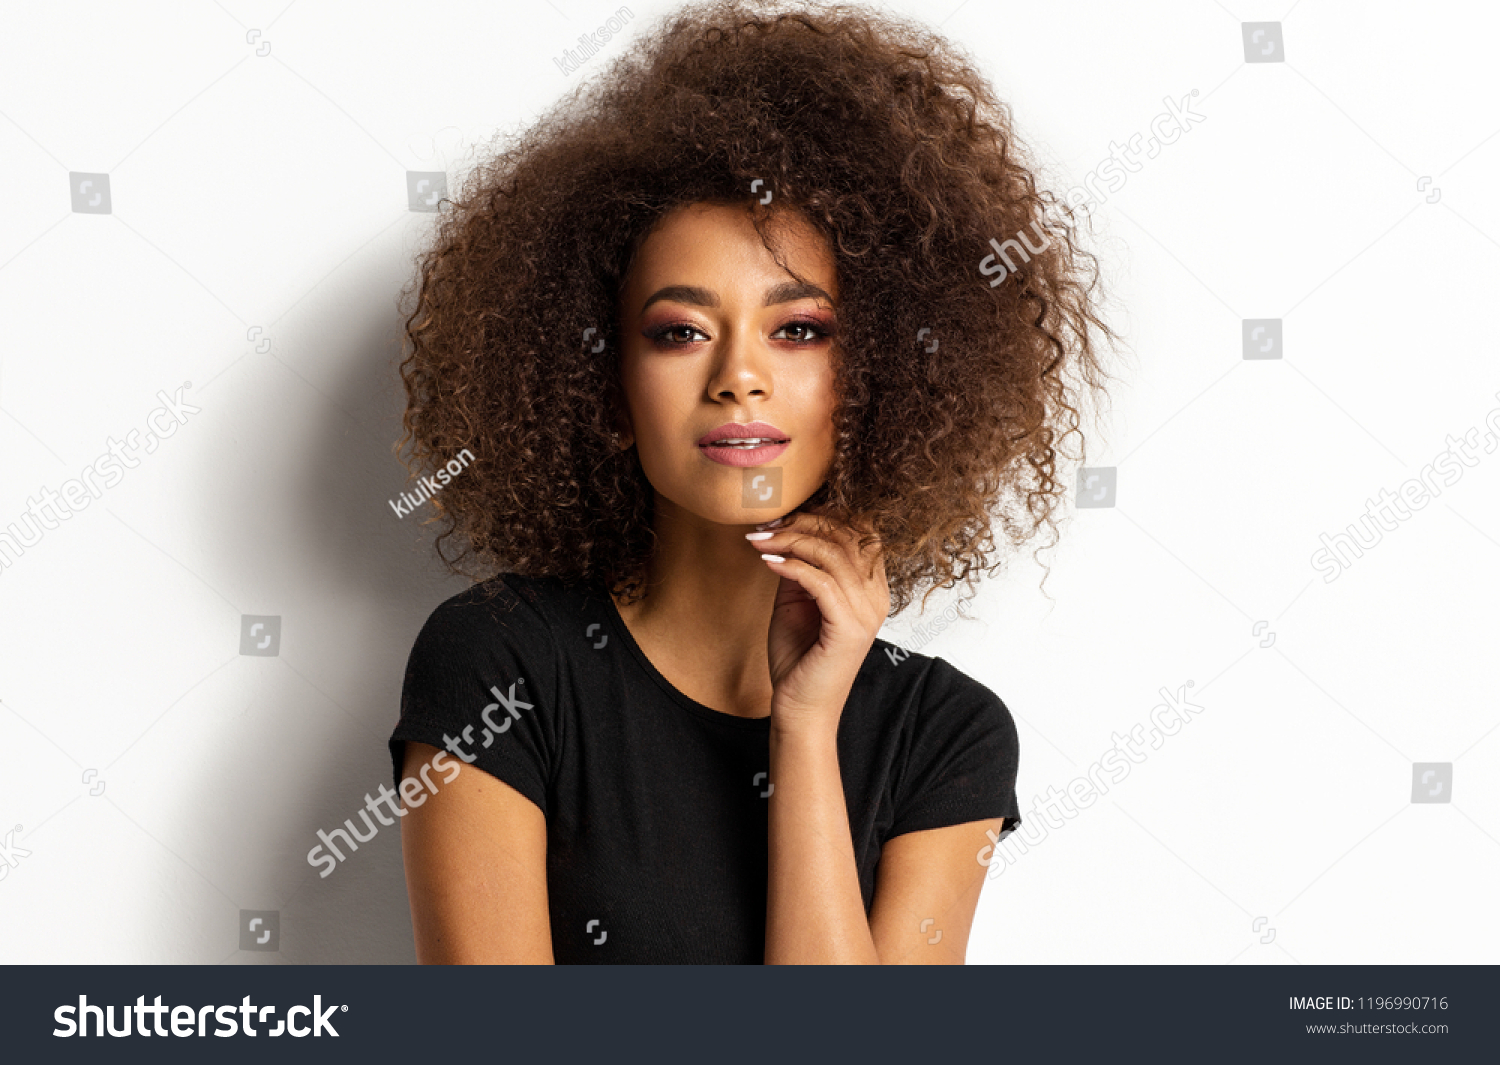 Beauty portrait of young adult african american woman with afro hairstyle looking at camera isolated on white background #1196990716